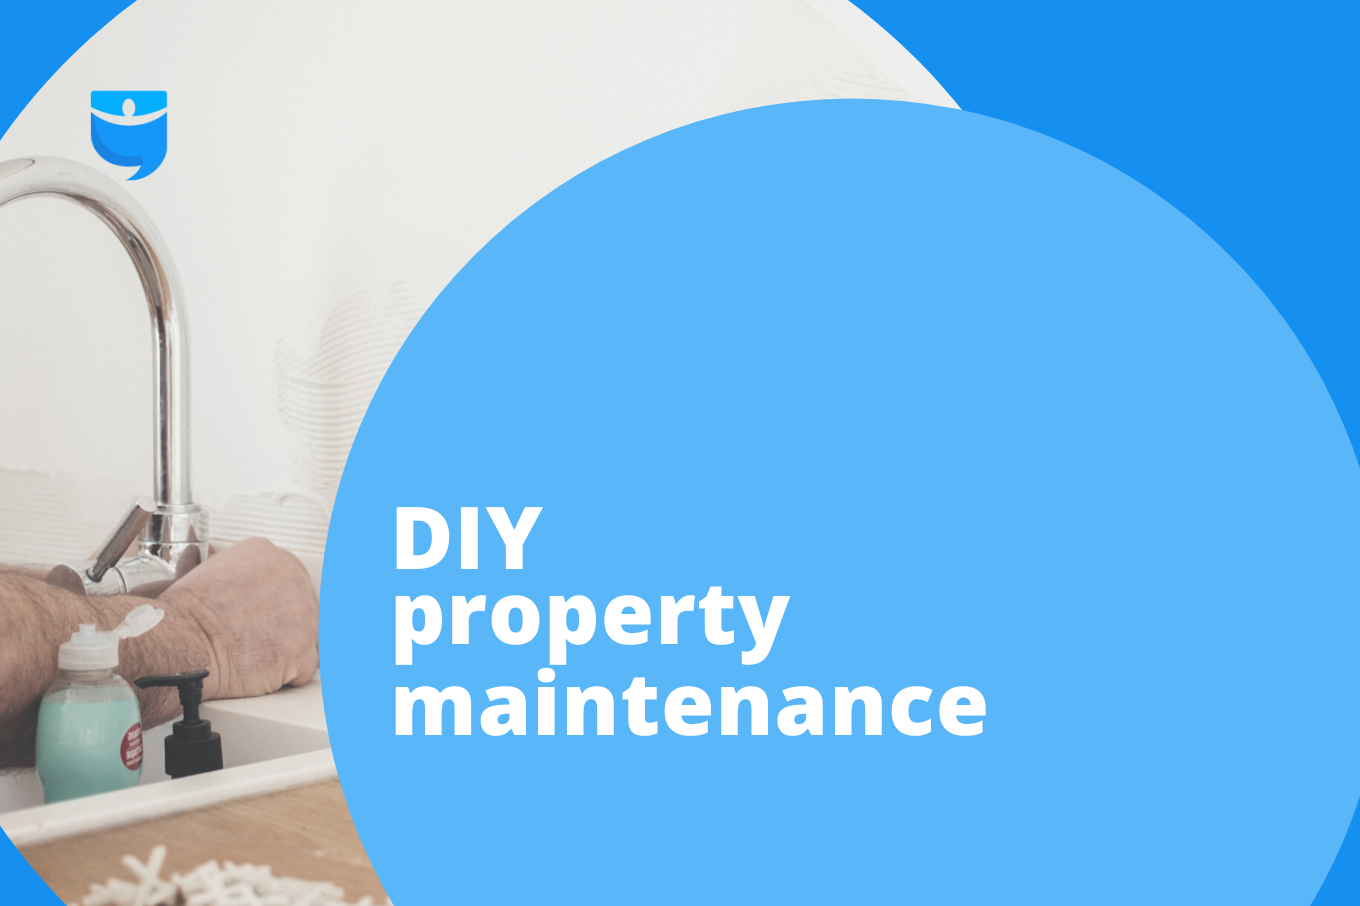 5 Questions to Ask Yourself If You’re Considering DIY Property Maintenance